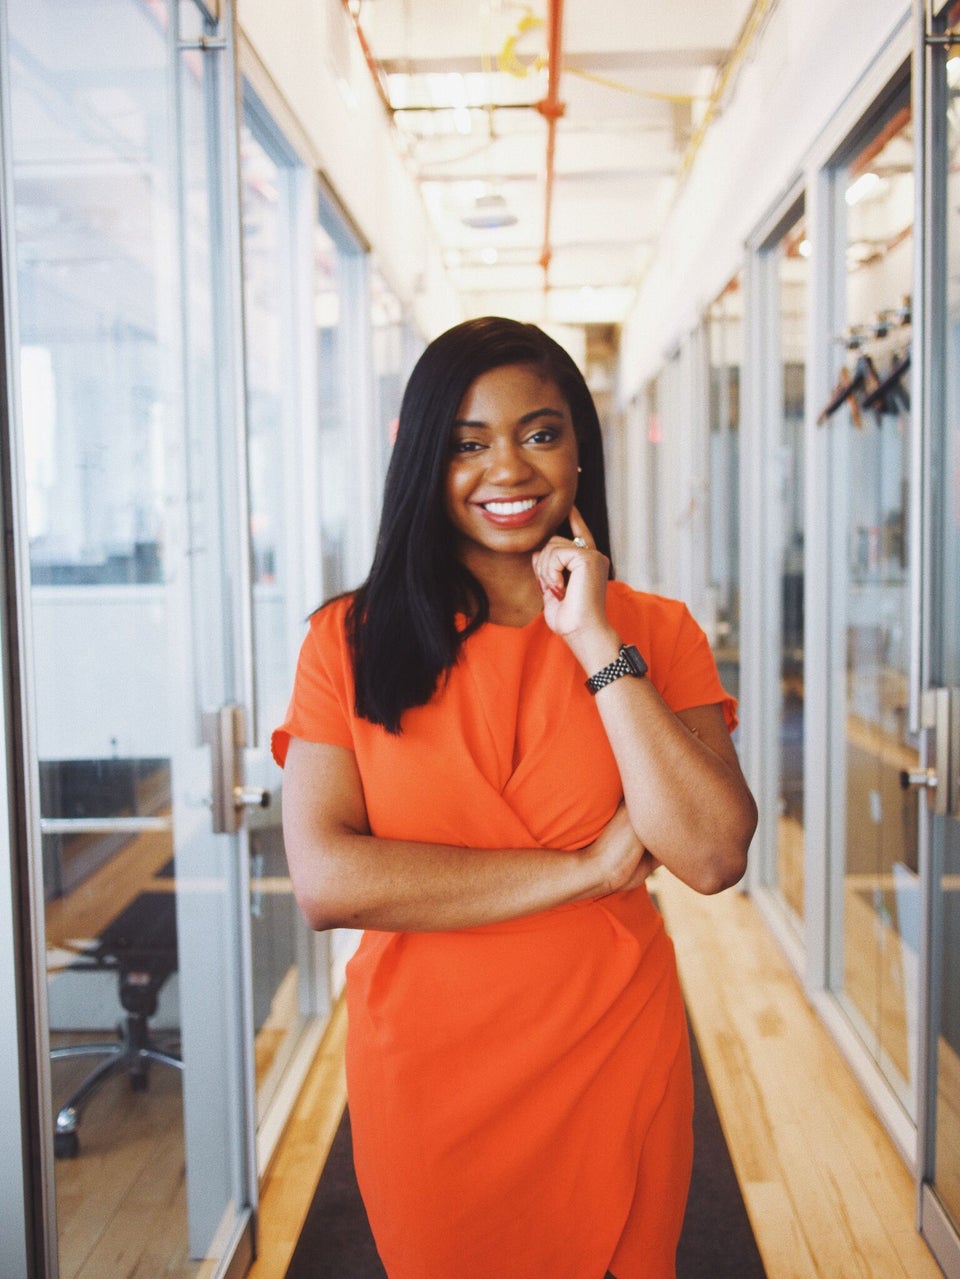 ESSENCE 50: ‘Her Agenda’ Founder Rhonesha Byng On Why The Key To Success For Black Women Is Each Other